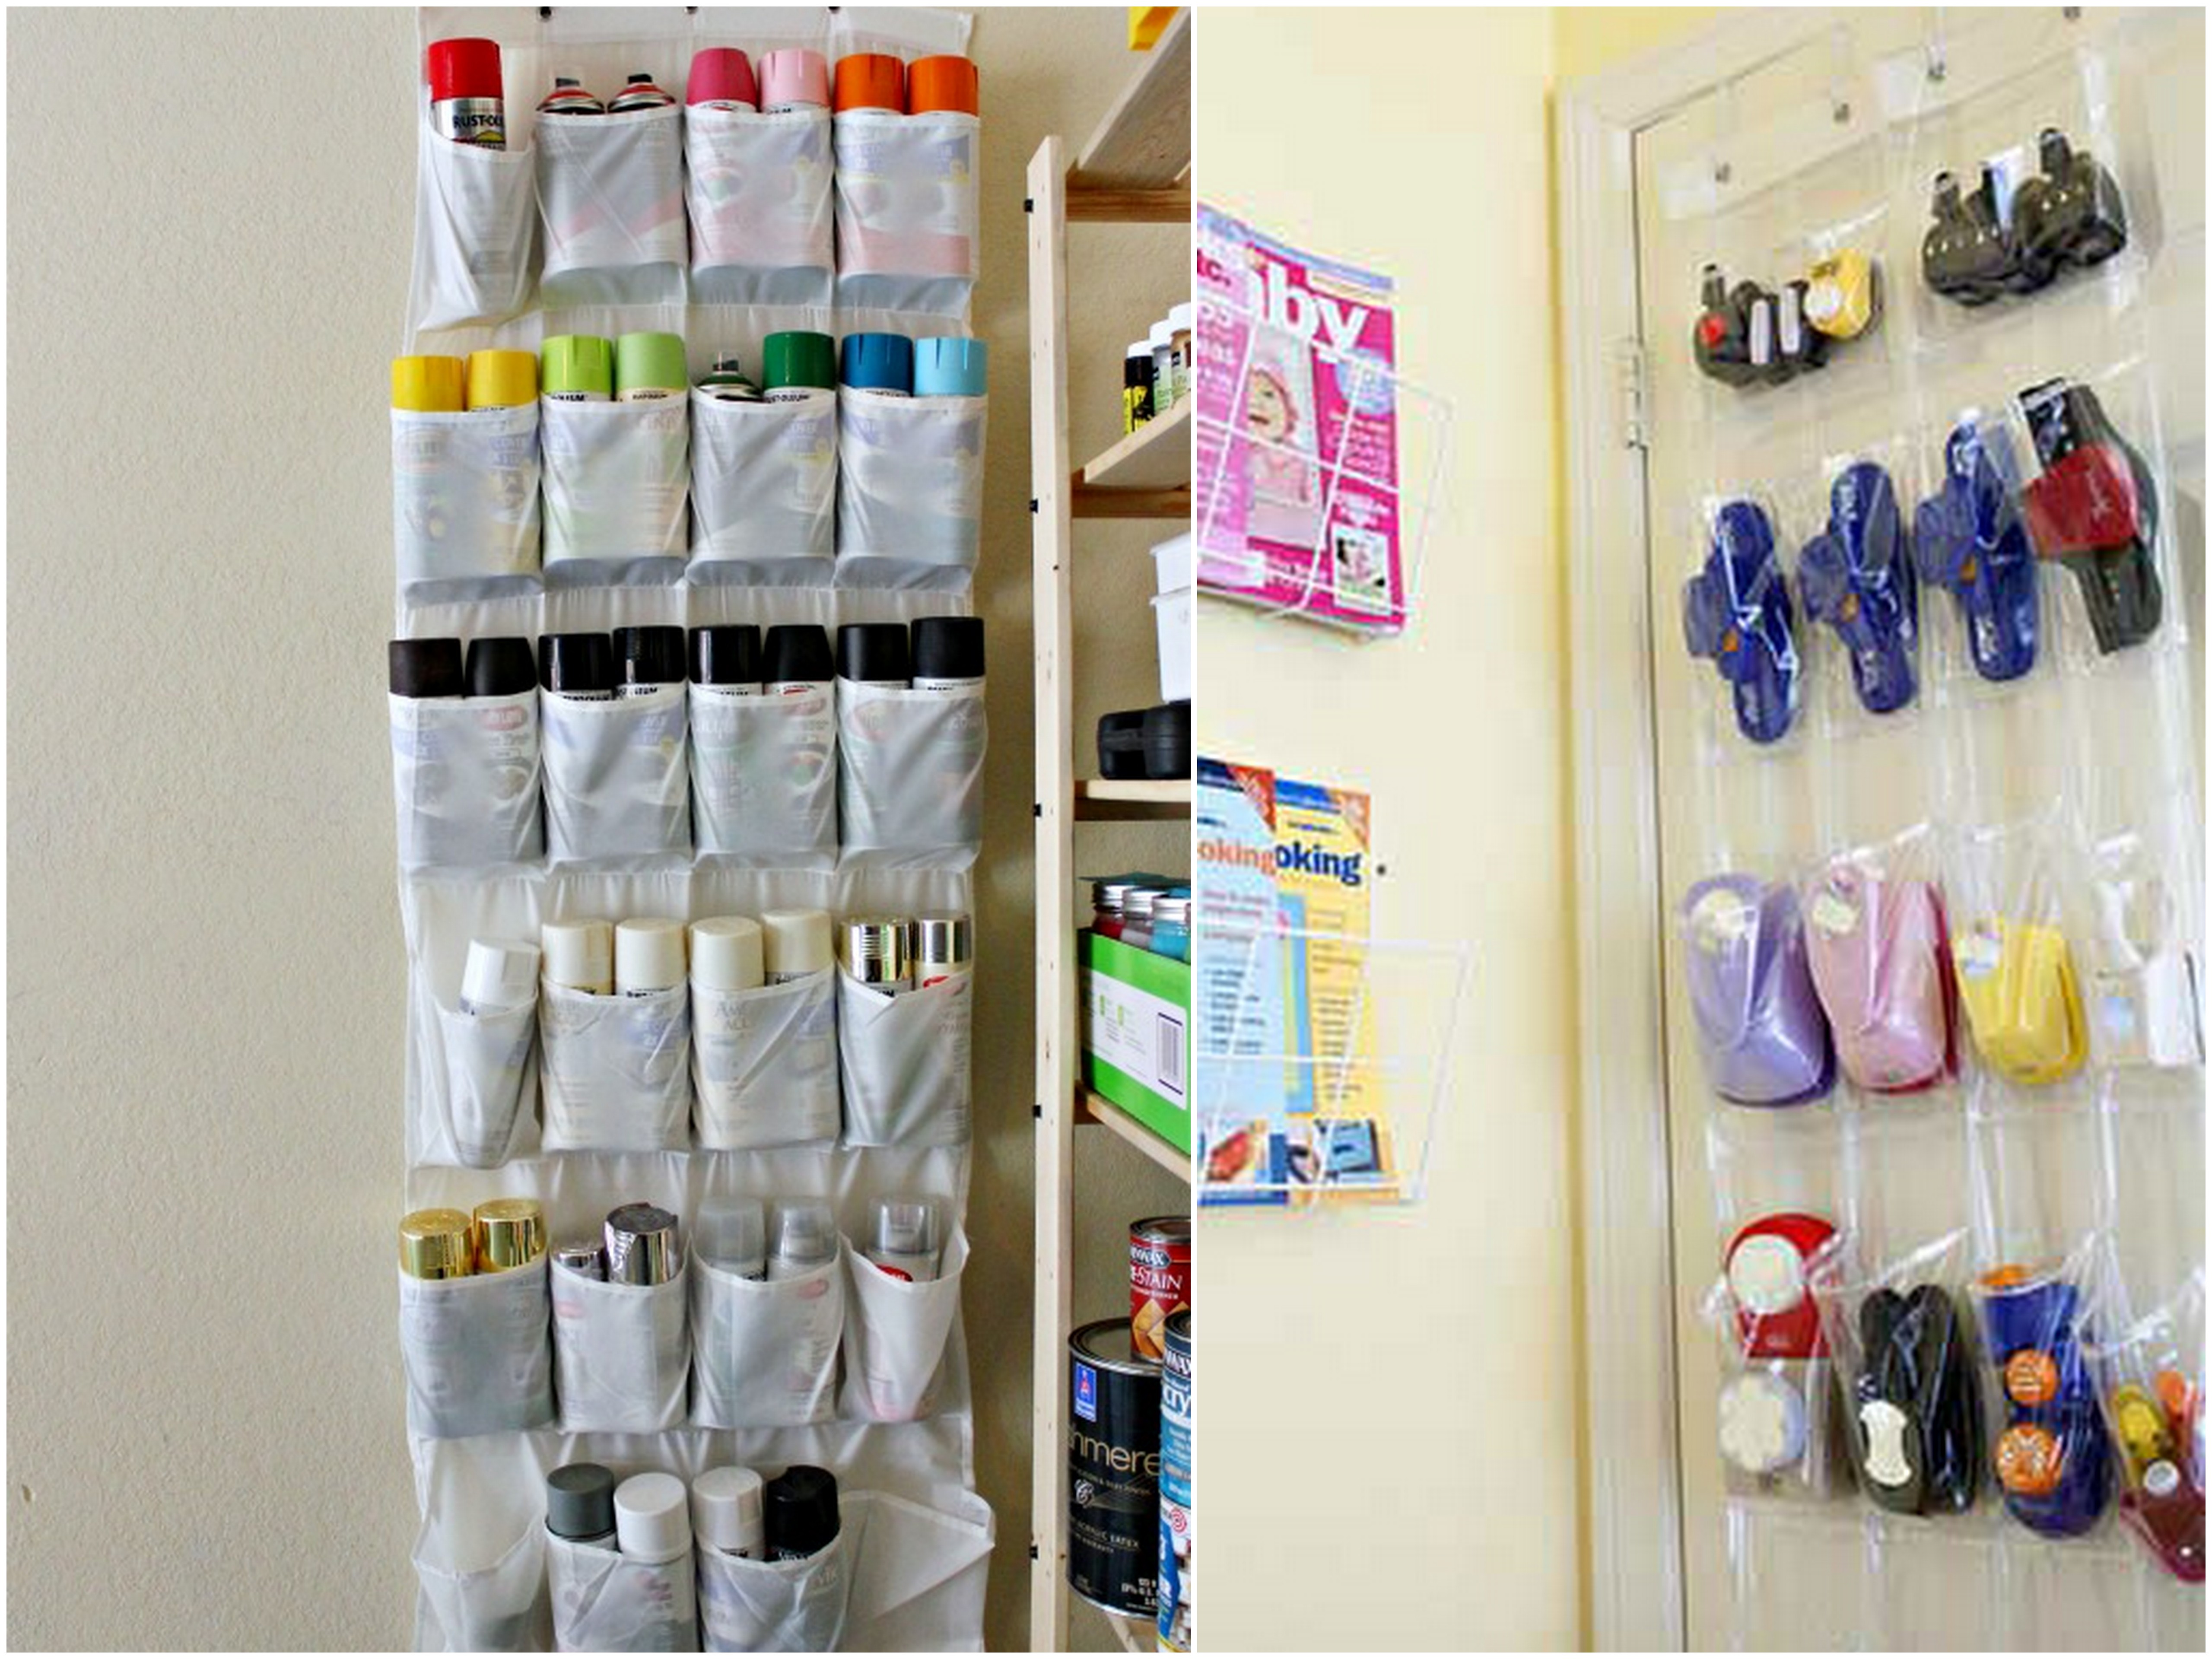 Repurpose an Over-the-Door Shoe Holder into a Cleaning Products Organizer